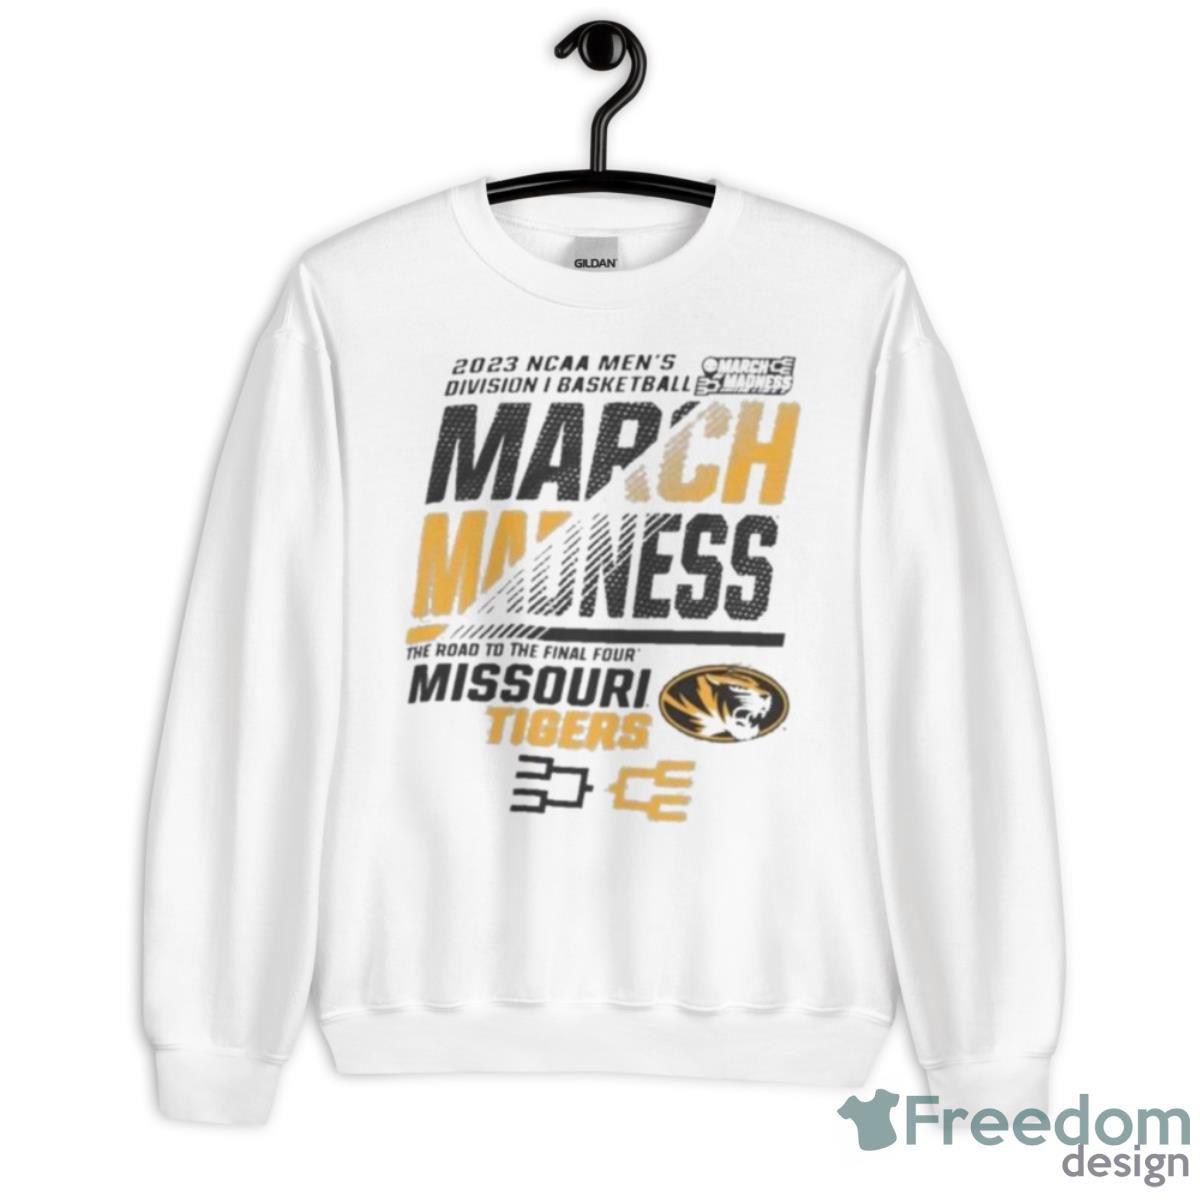 Missouri Men’s Basketball 2023 NCAA March Madness The Road To Final Four Shirt